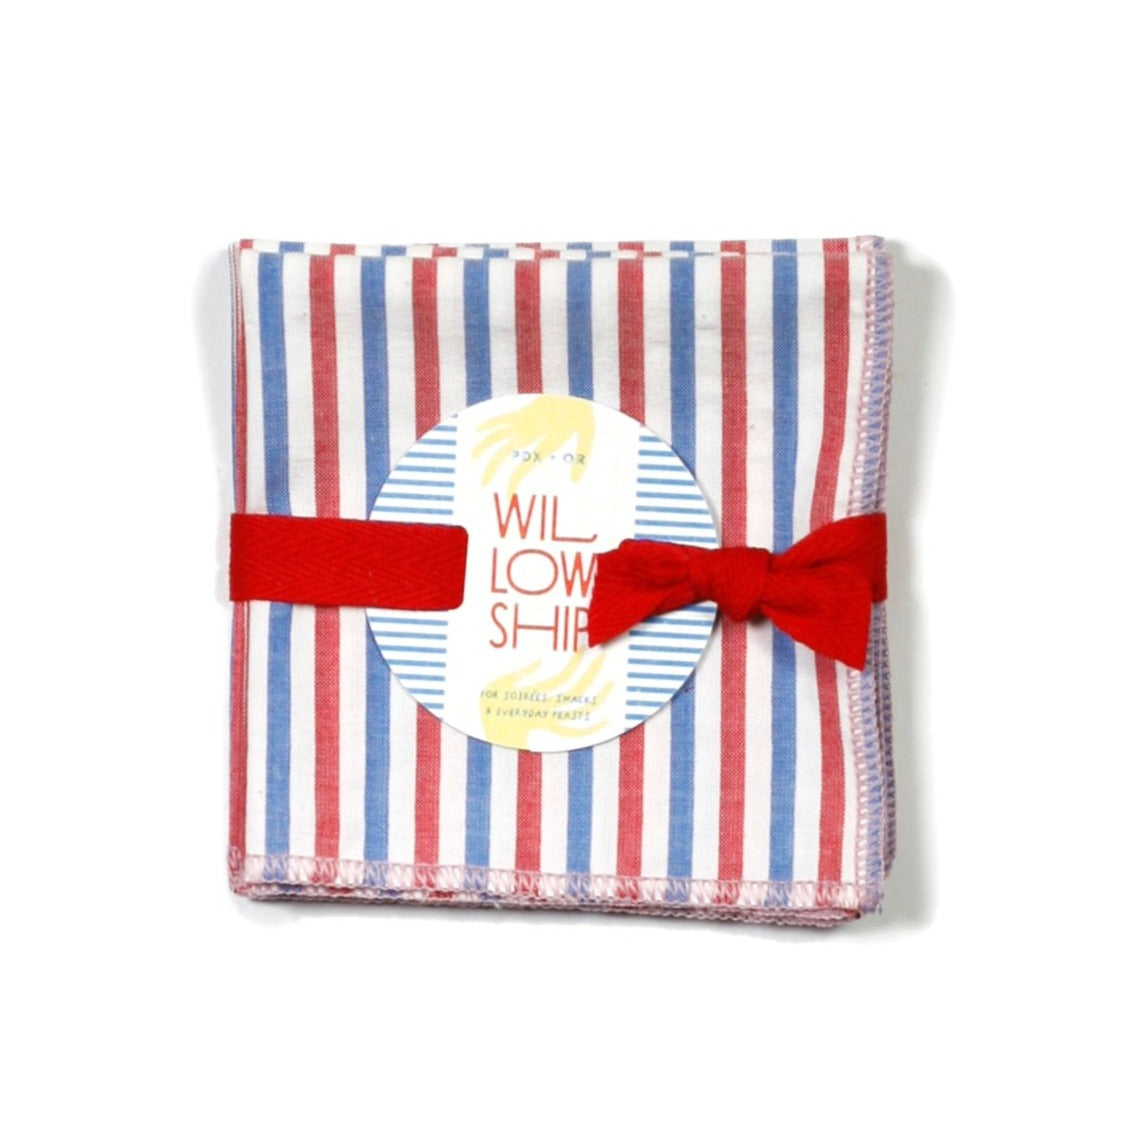 Parlor Primary Color Striped Cocktail Napkins, Set of 4